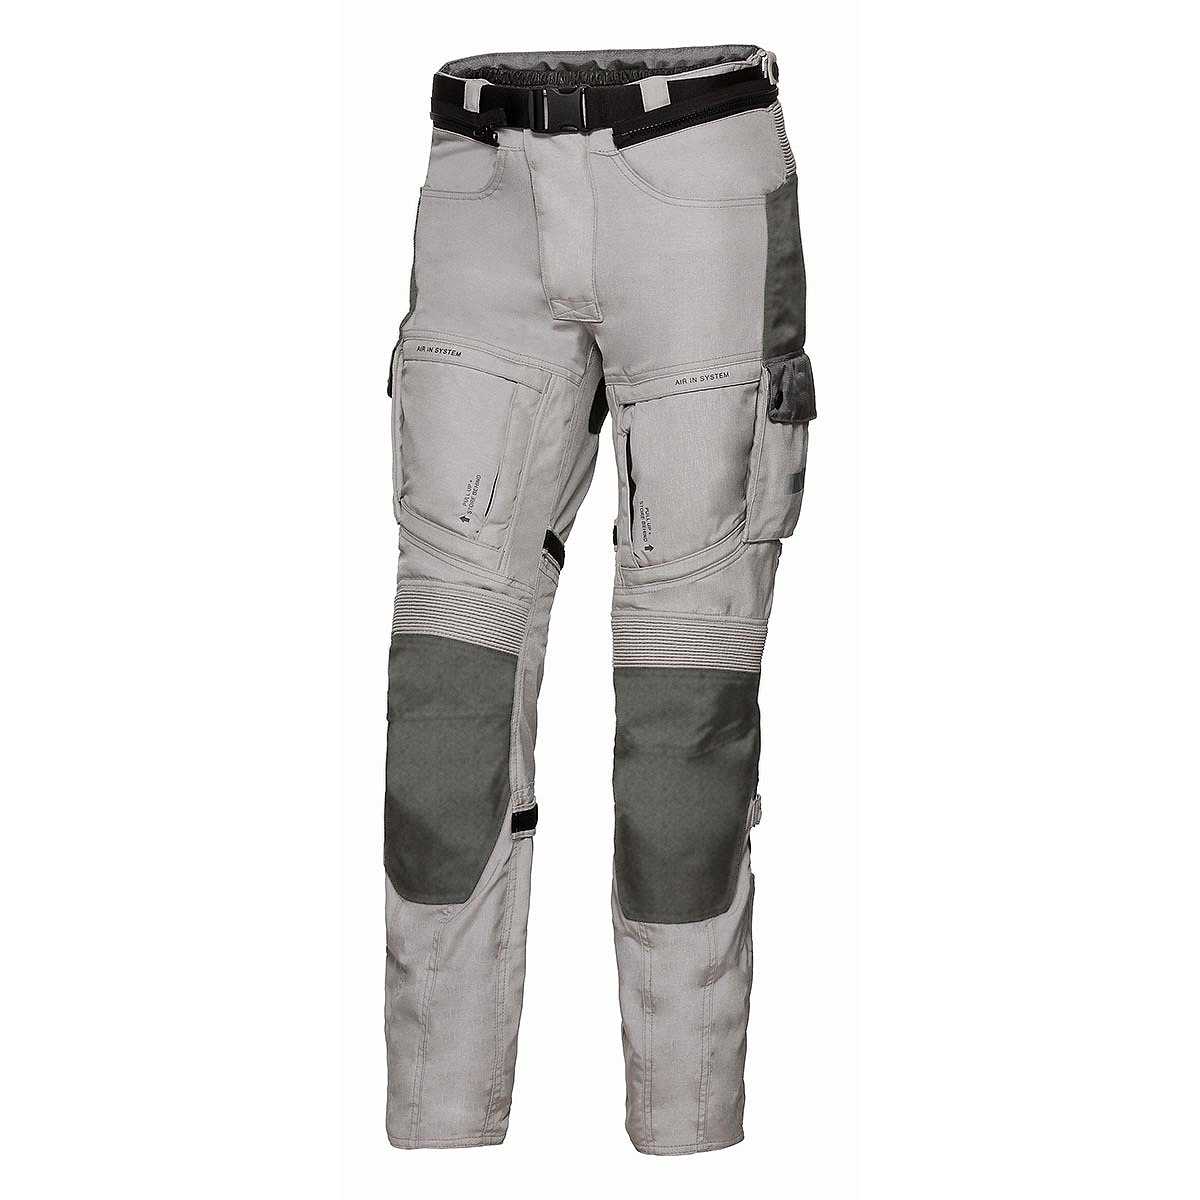 Stay Safe And Look Good With The Best Motorcycle Jeans